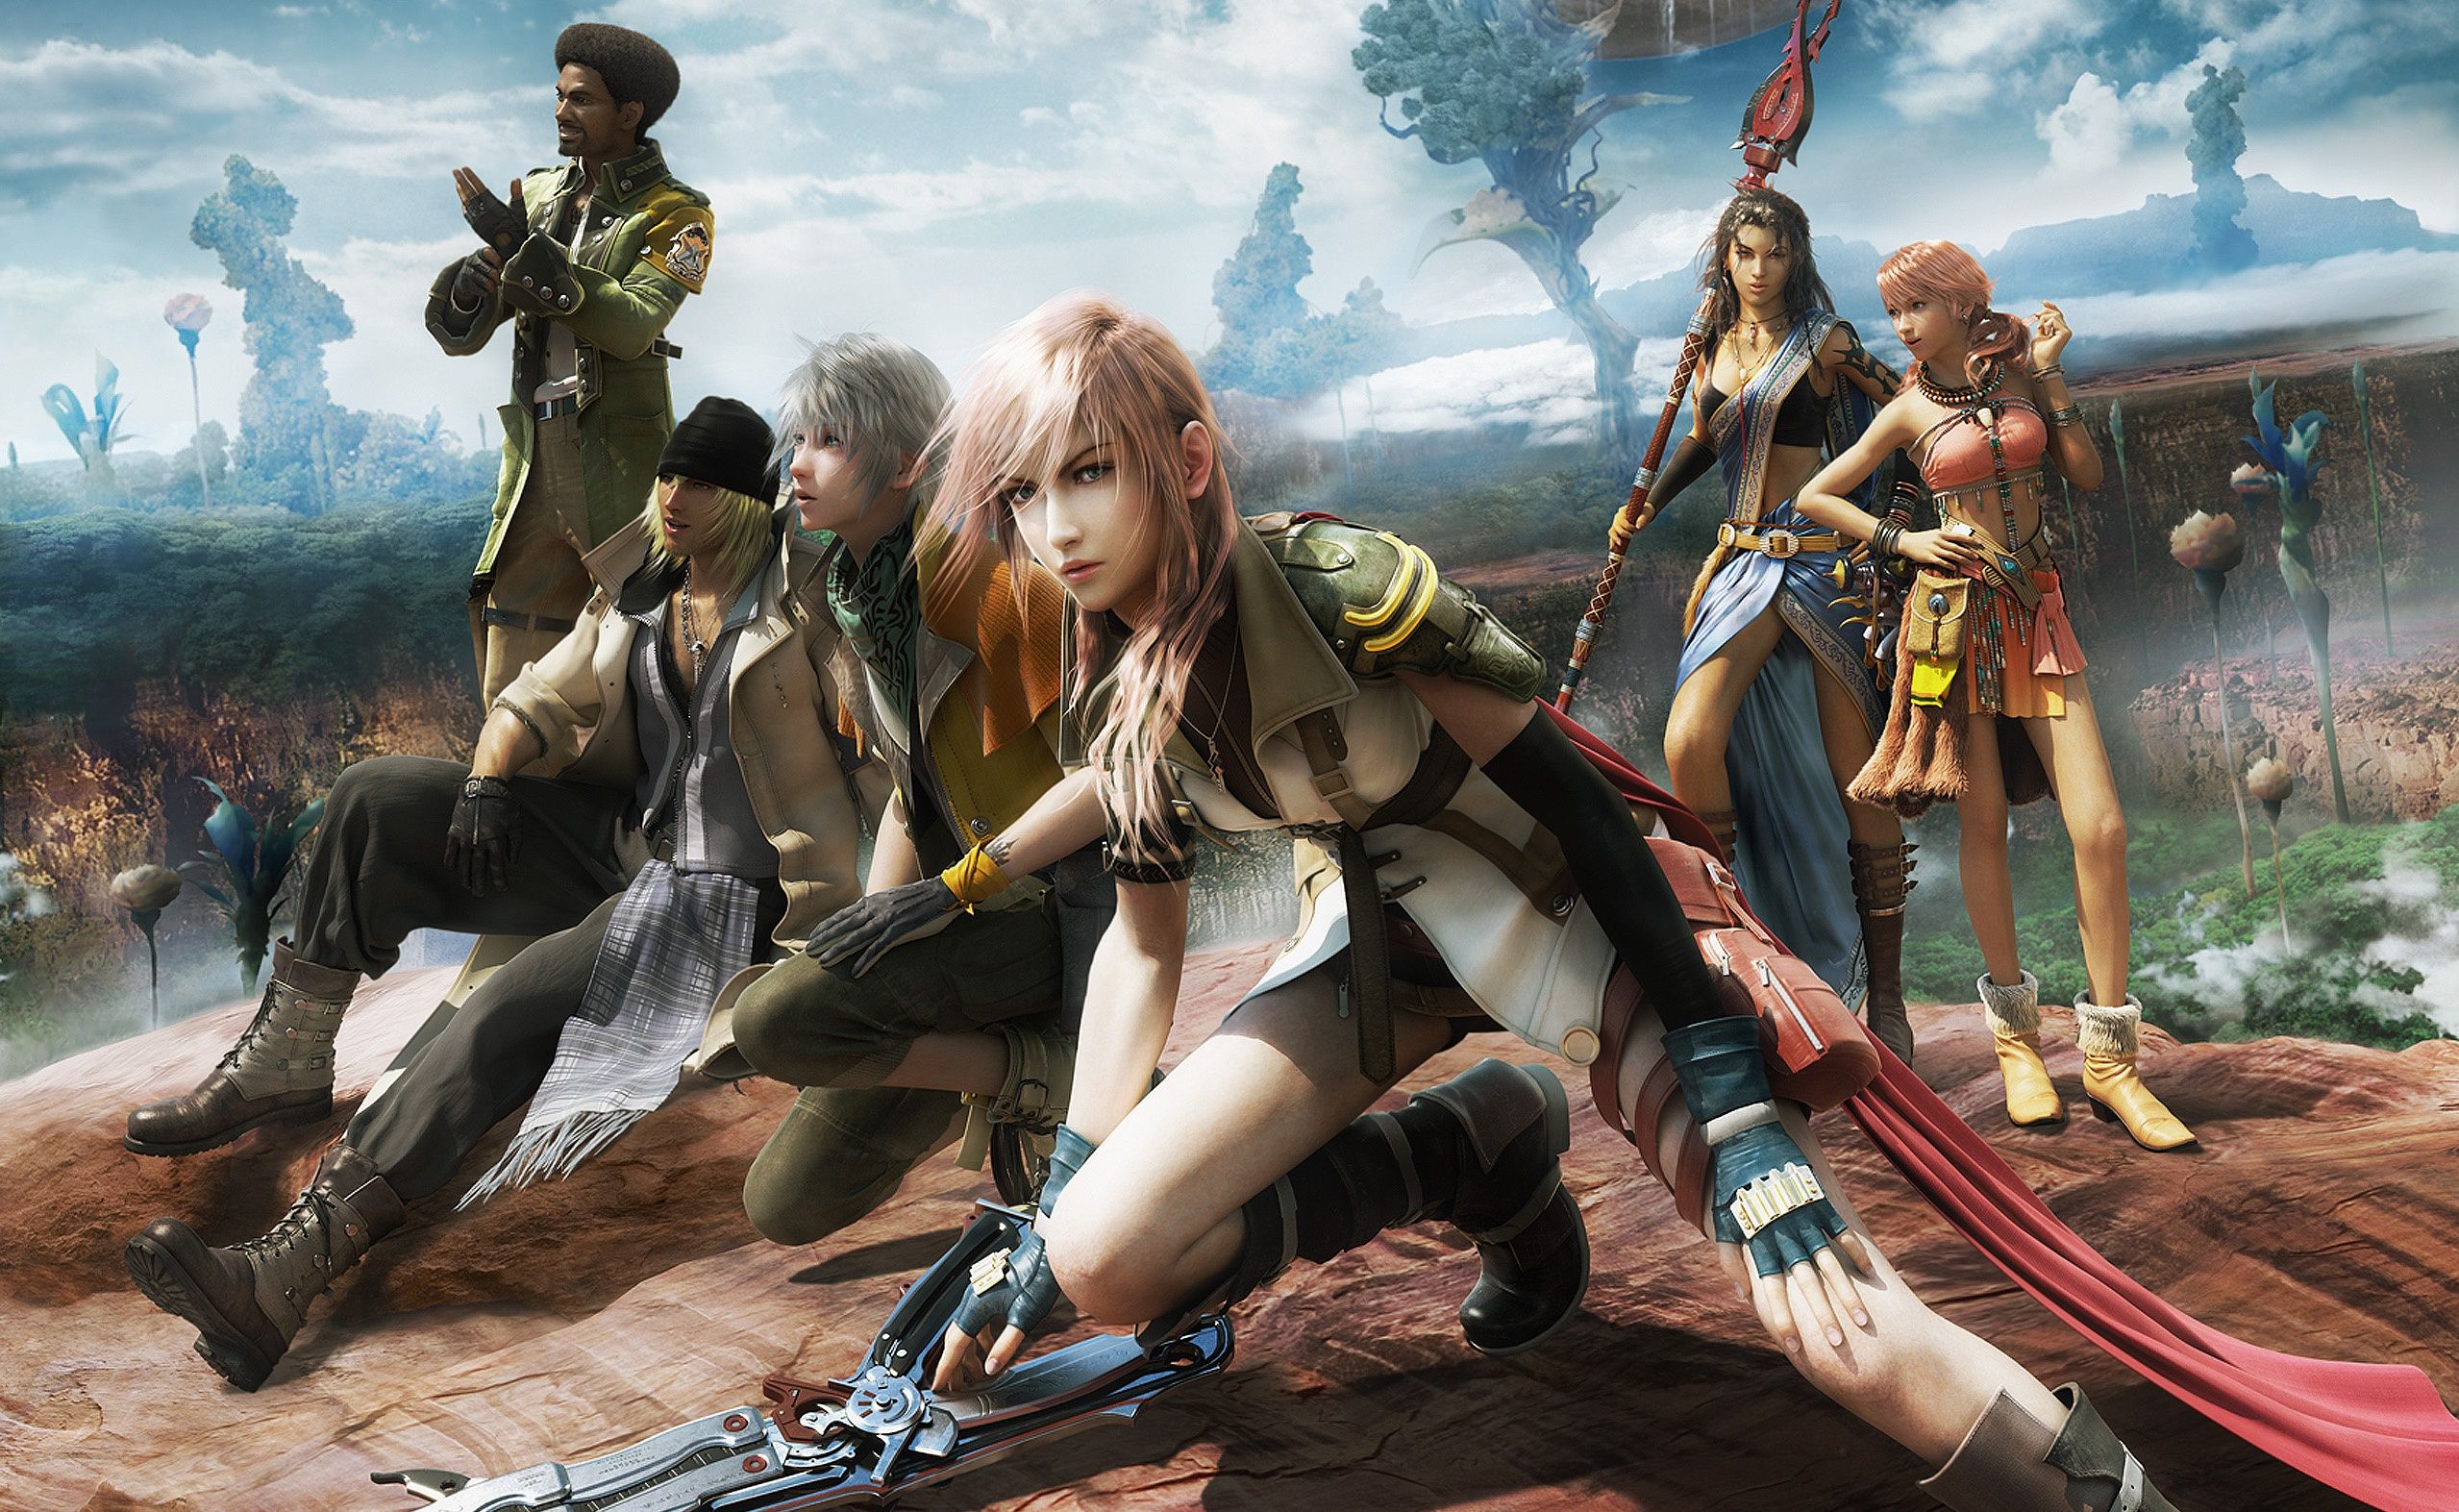 33 Final Fantasy XIII HD Wallpapers | Backgrounds - Wallpaper Abyss